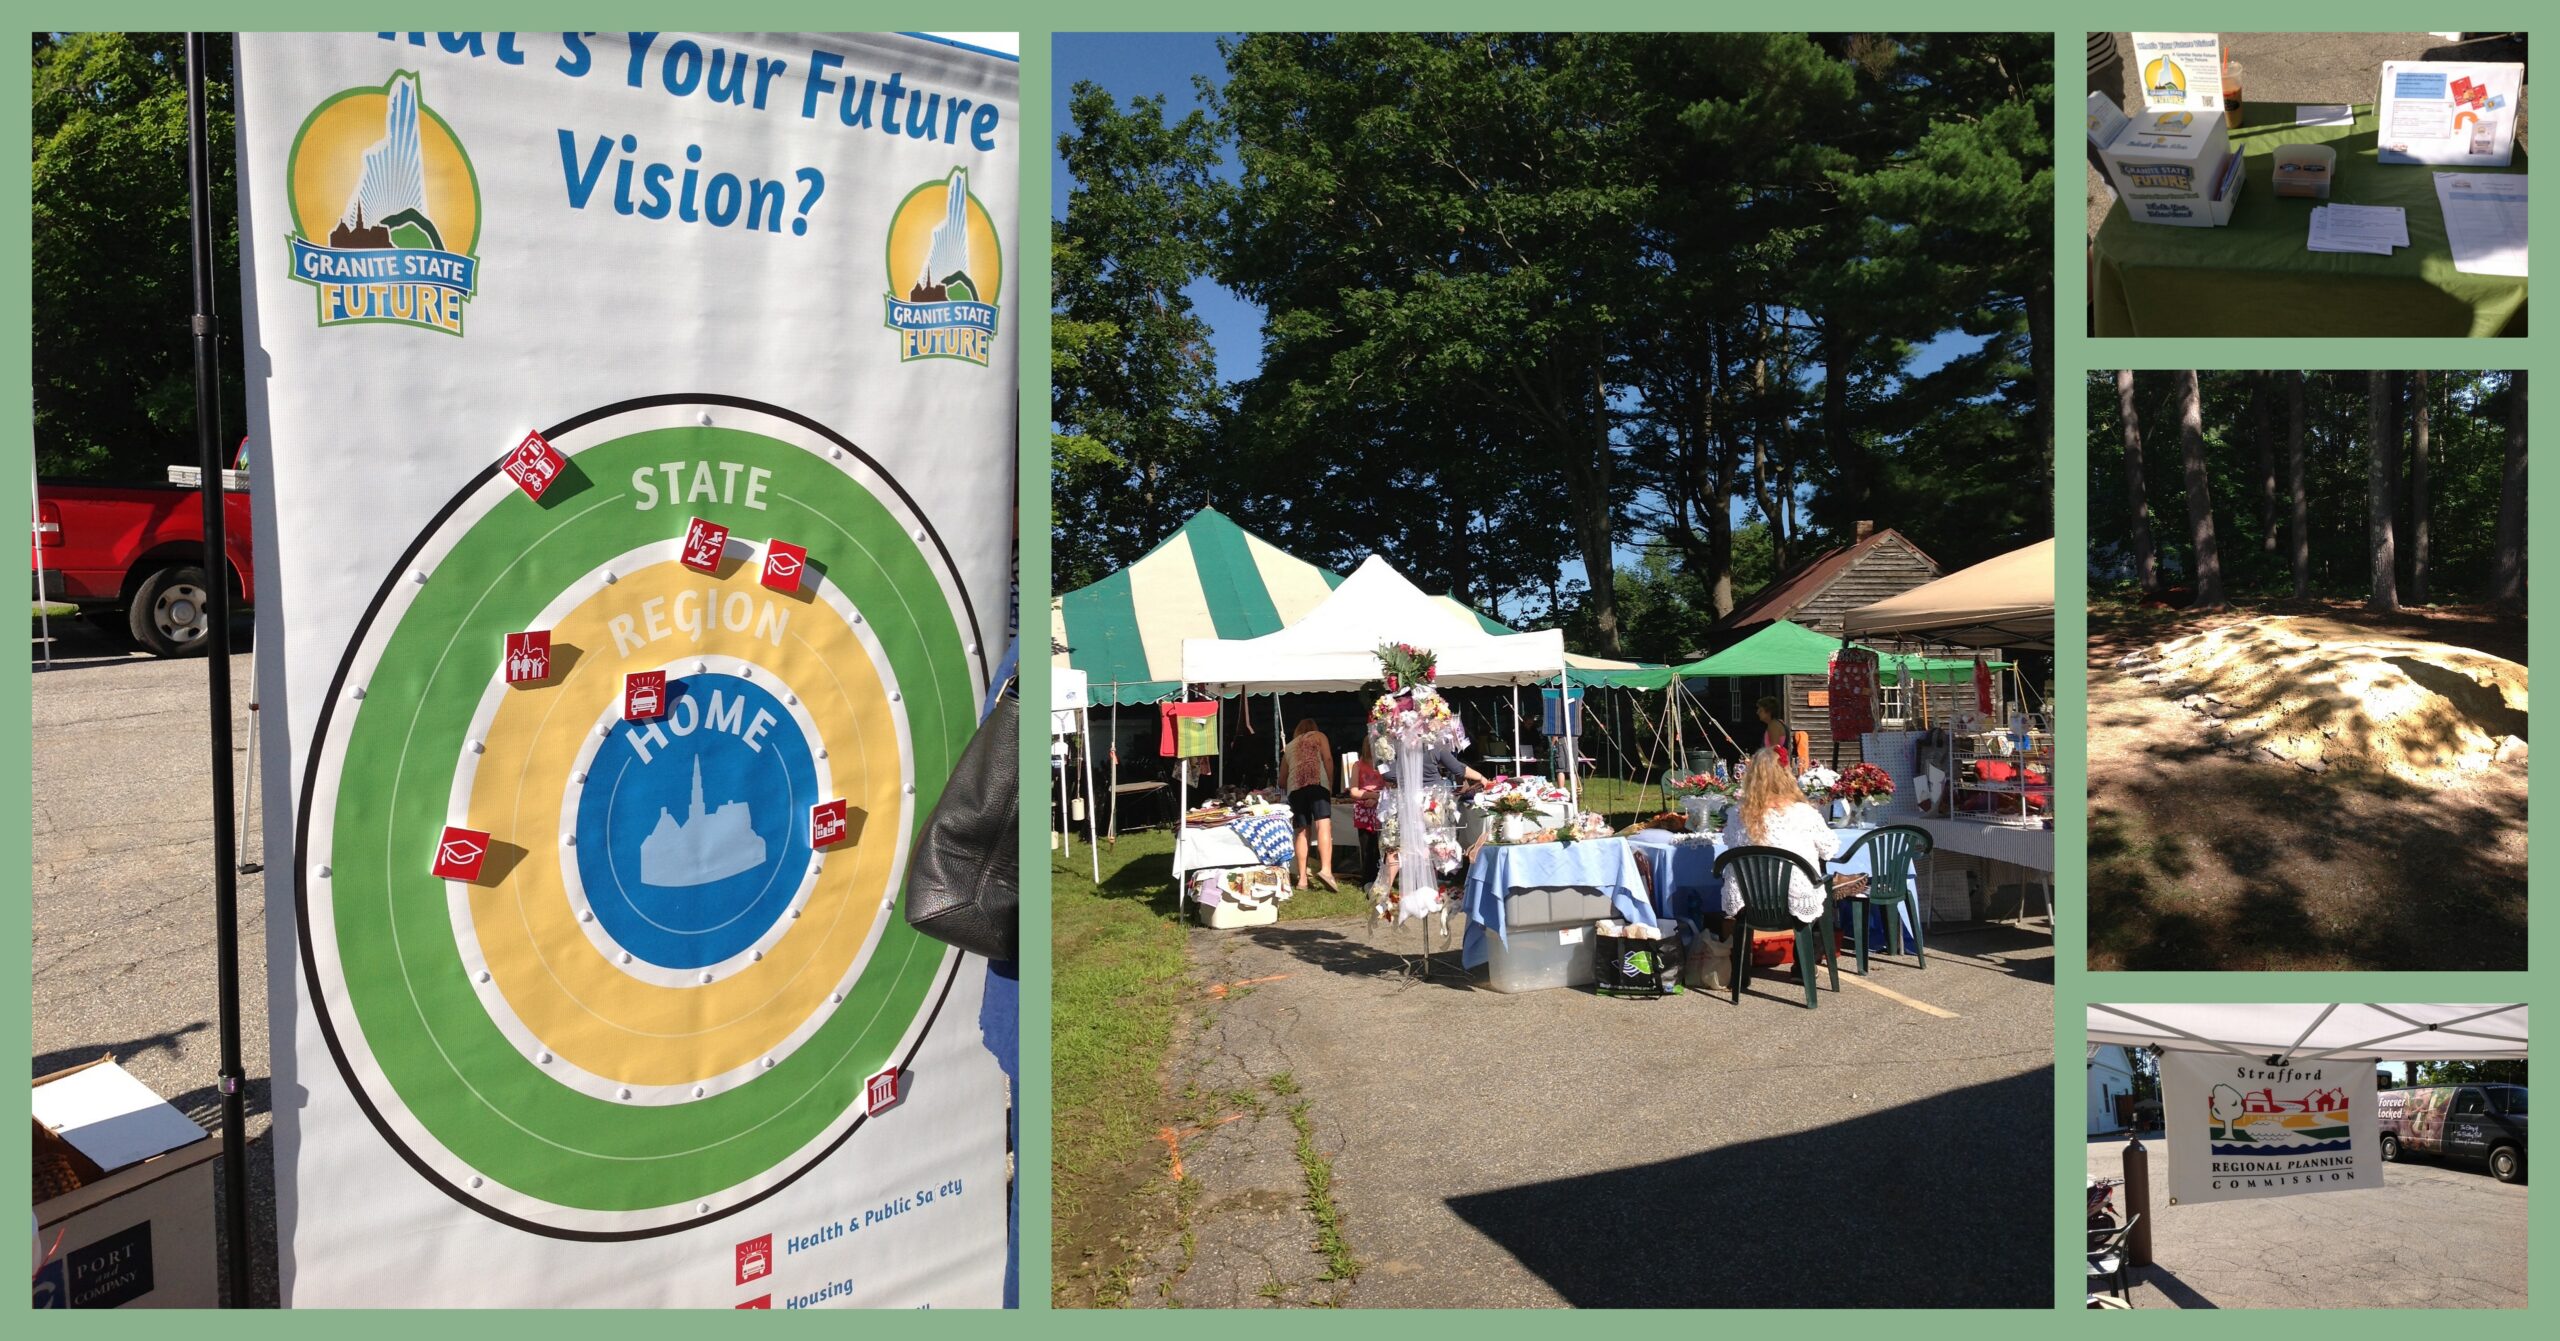 Up-close shot of the interactive outreach display for Granite State Future at the Northwood Beanhole Bash